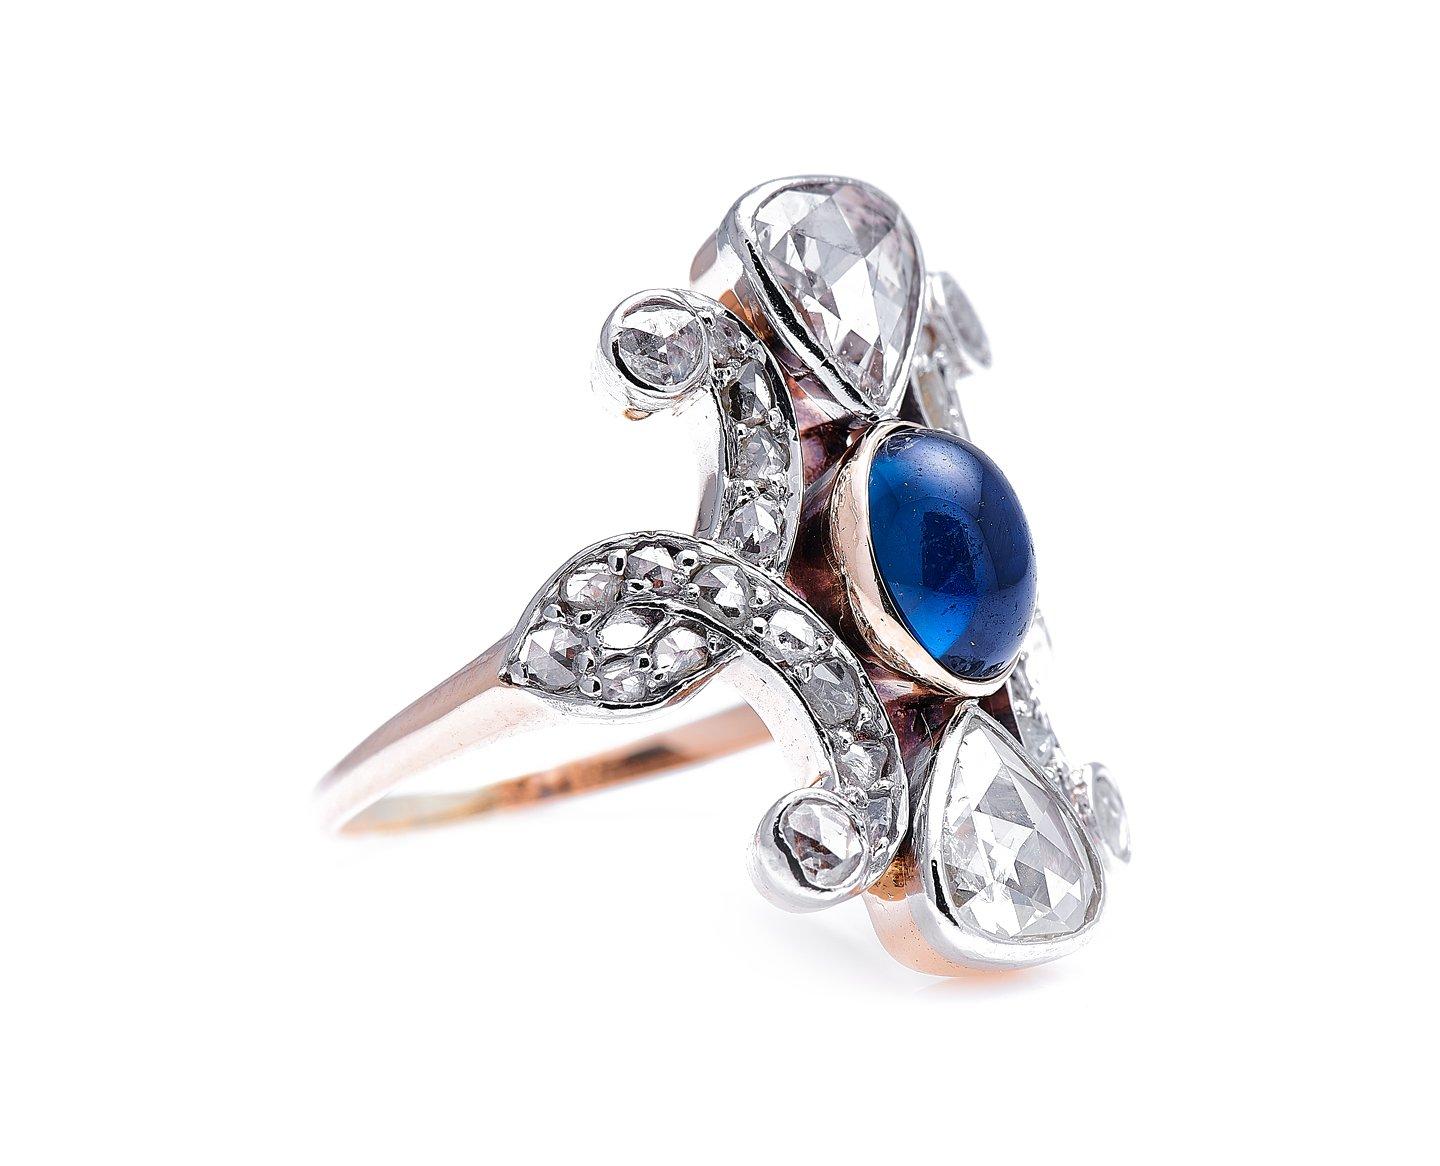 Sapphire and diamond ring, circa 1900. Art Nouveau, which appeared in a blaze of creativity at the end of the 19th century was inspired by a heady combination of symbolist poetry, newly available Japanese art and the flowing, asymmetrical forms of